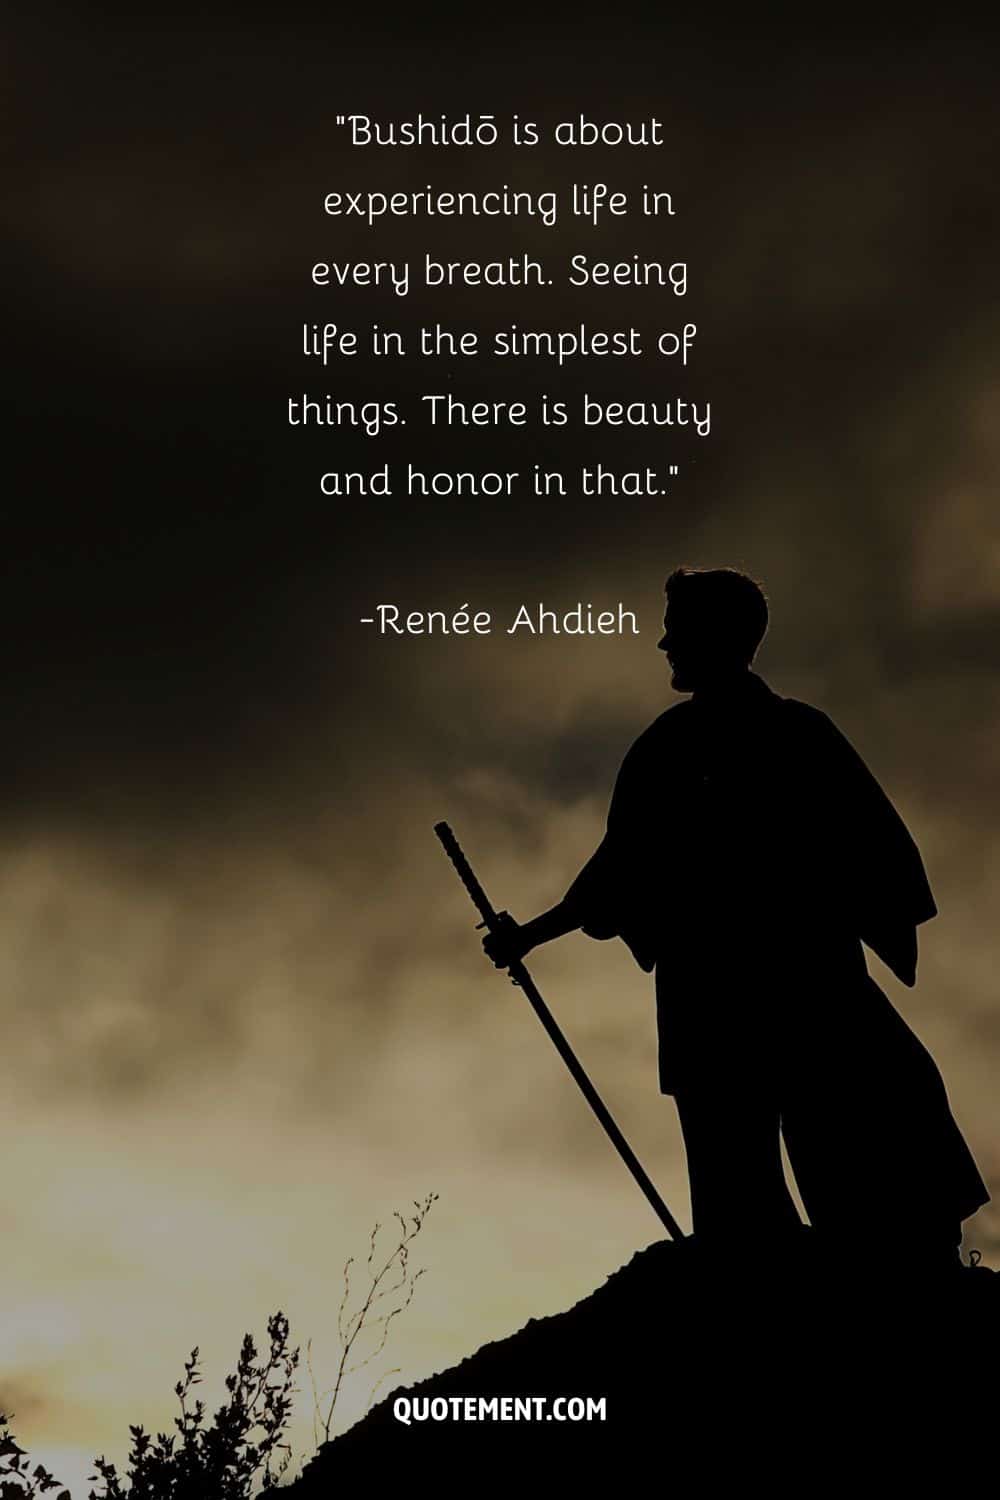 A captivating shadow wields a powerful katana representing famous bushido quote